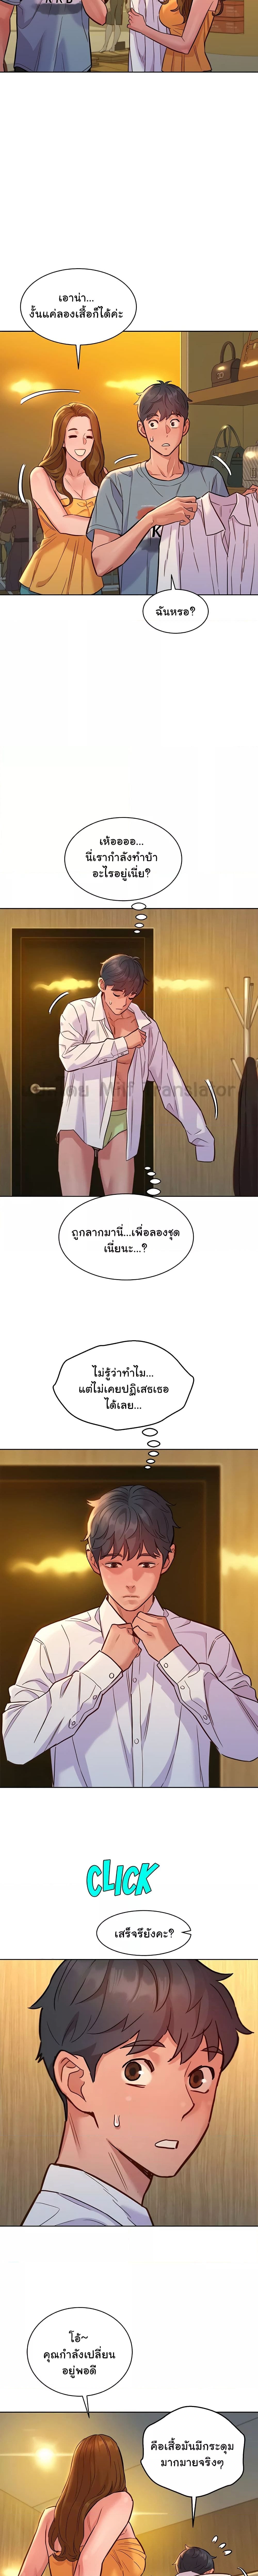 Let’s Hang Out from Today ตอนที่ 47 ภาพ 13